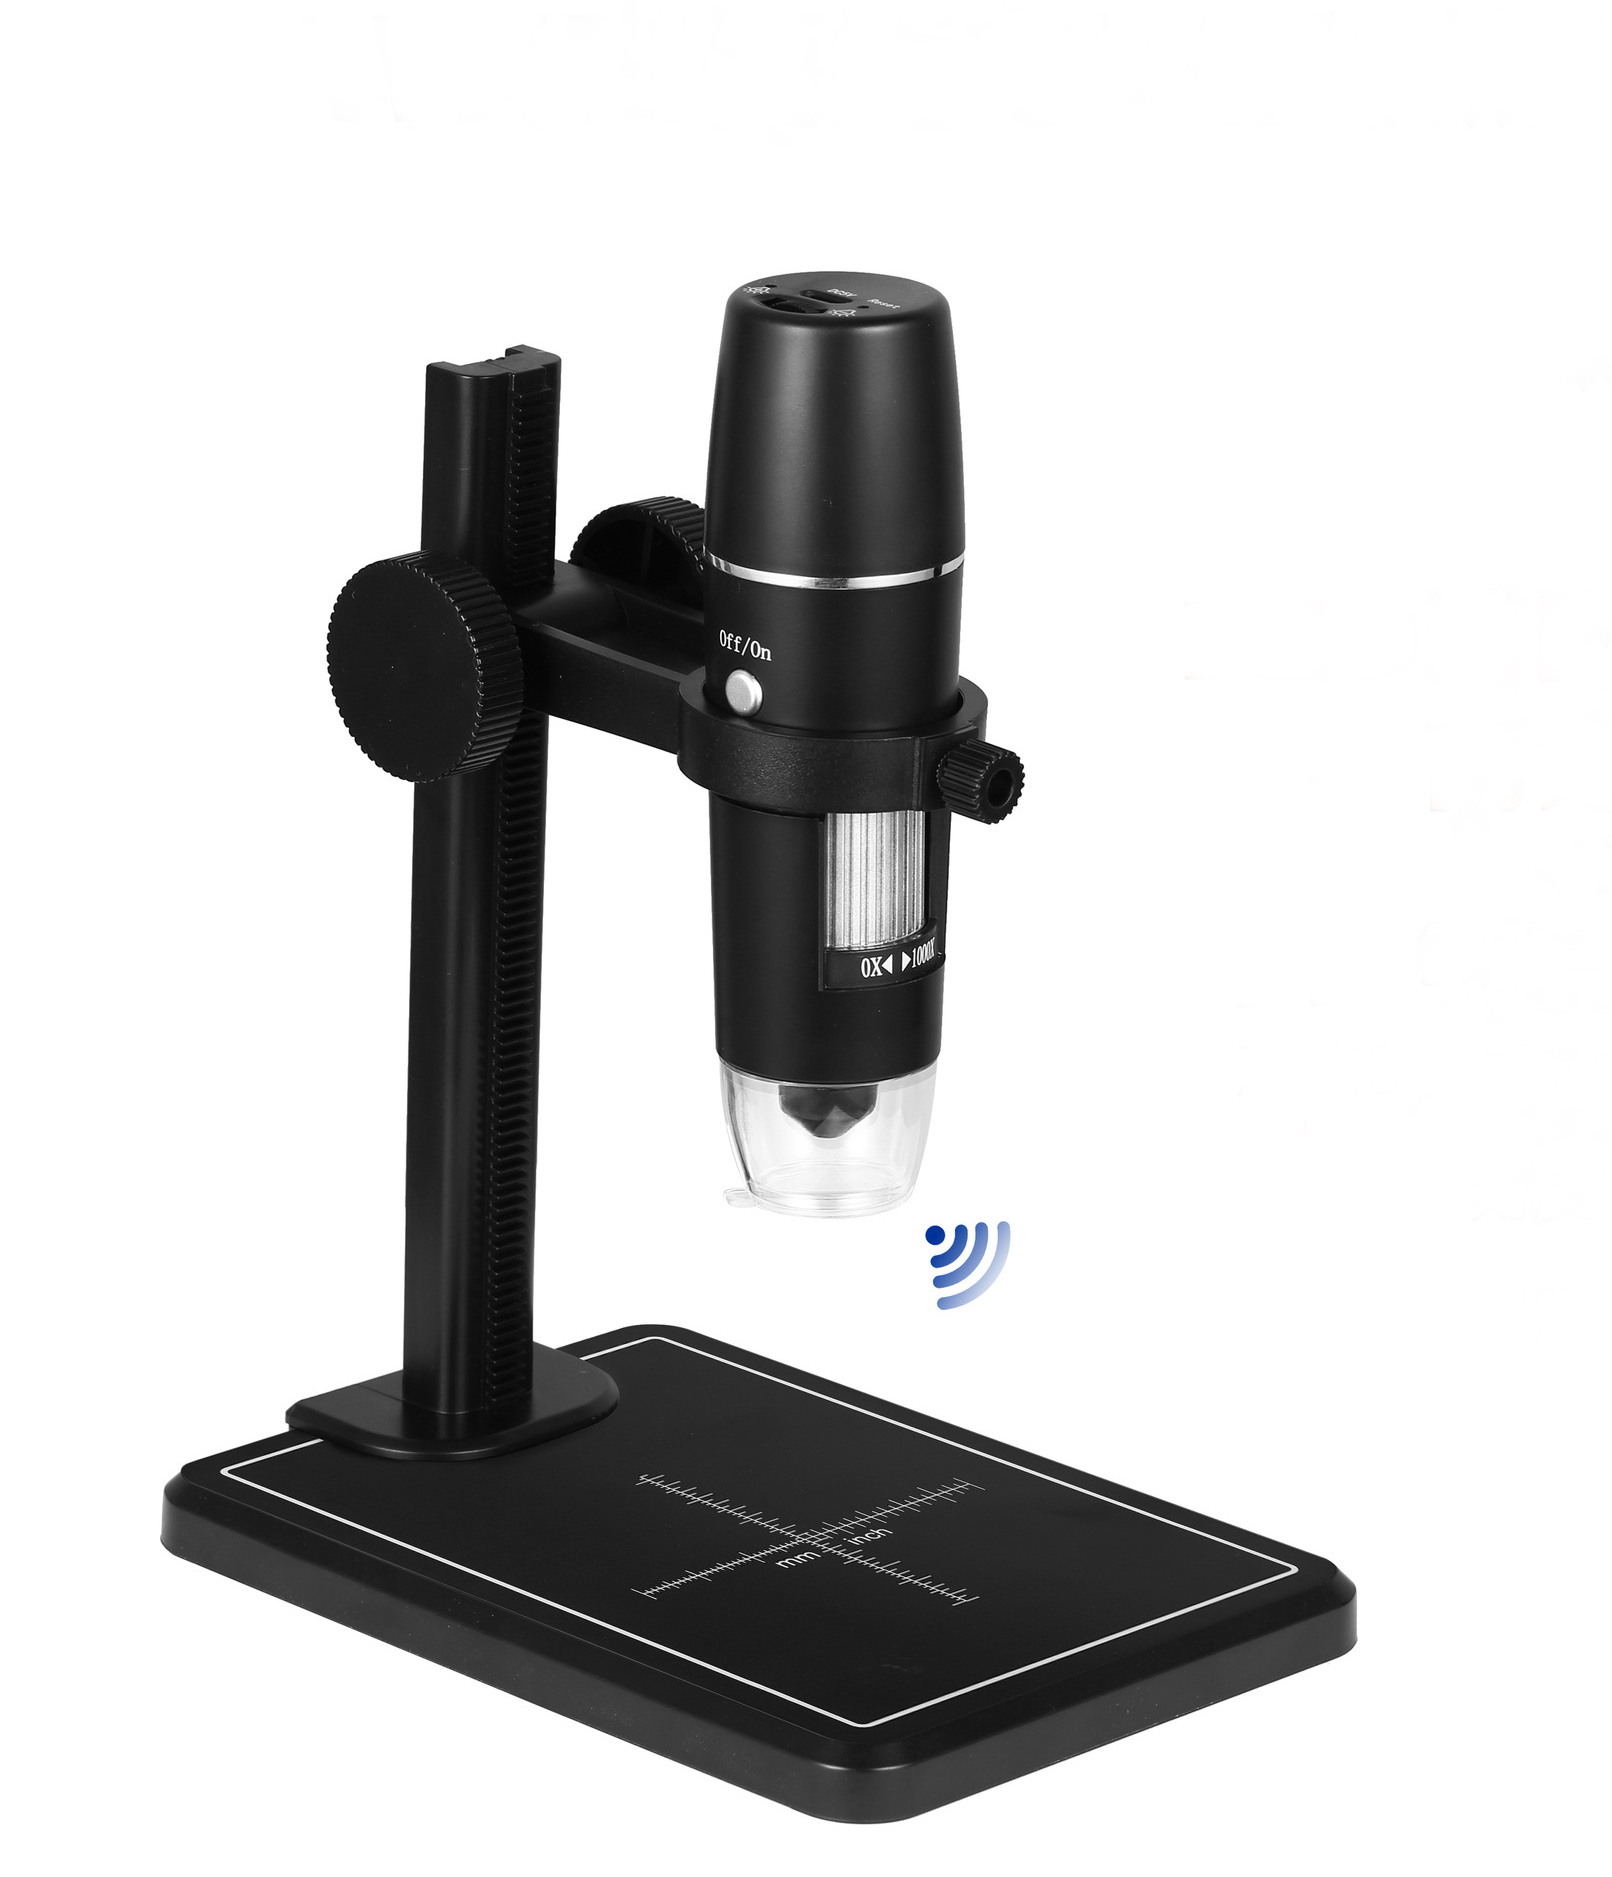 1000x wireless WIFI connection Portable digital Microscope - Click Image to Close